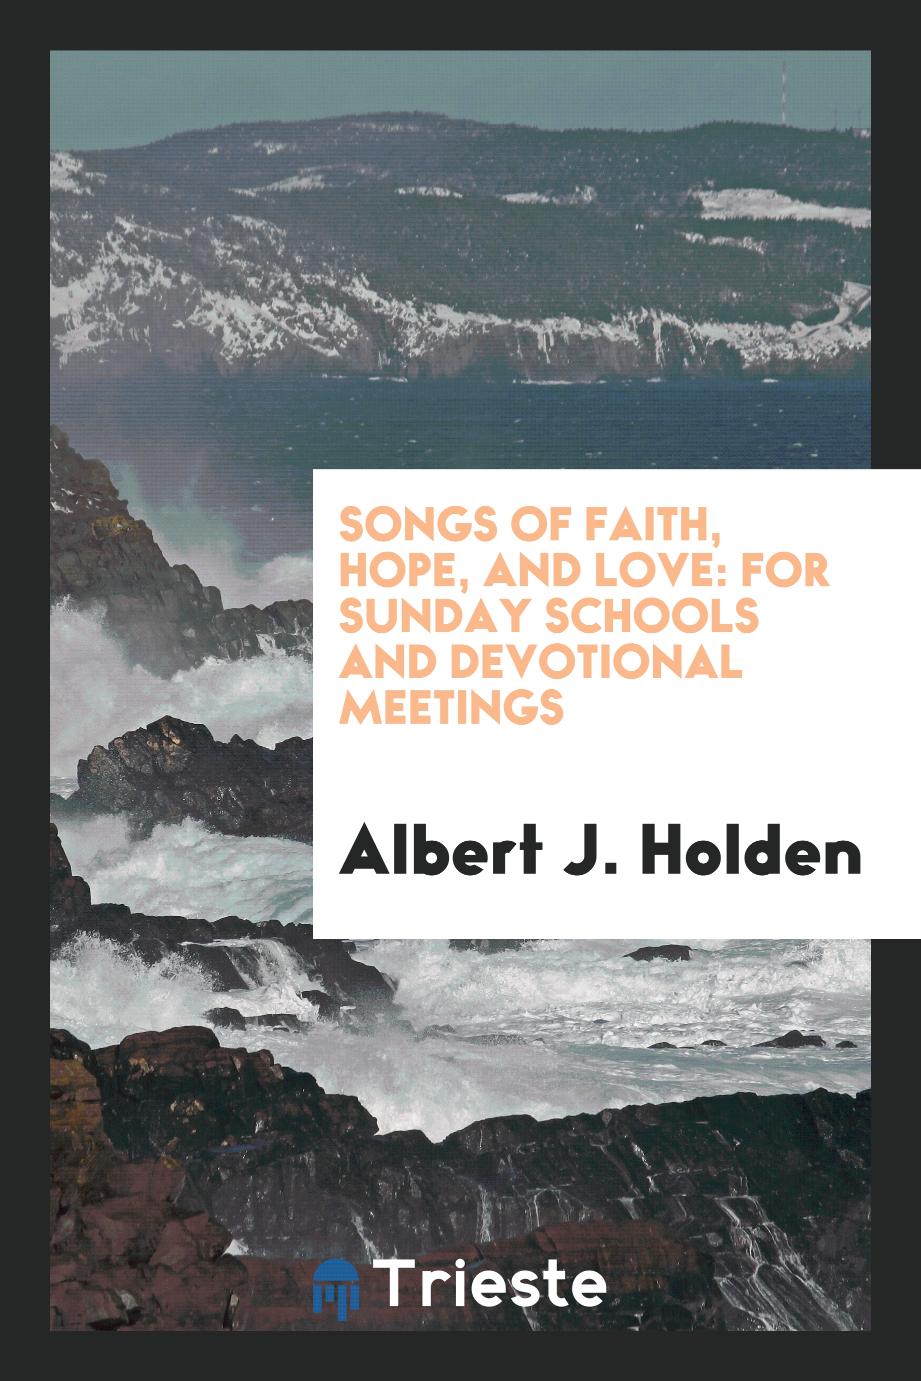 Songs of Faith, Hope, and Love: For Sunday Schools and Devotional Meetings